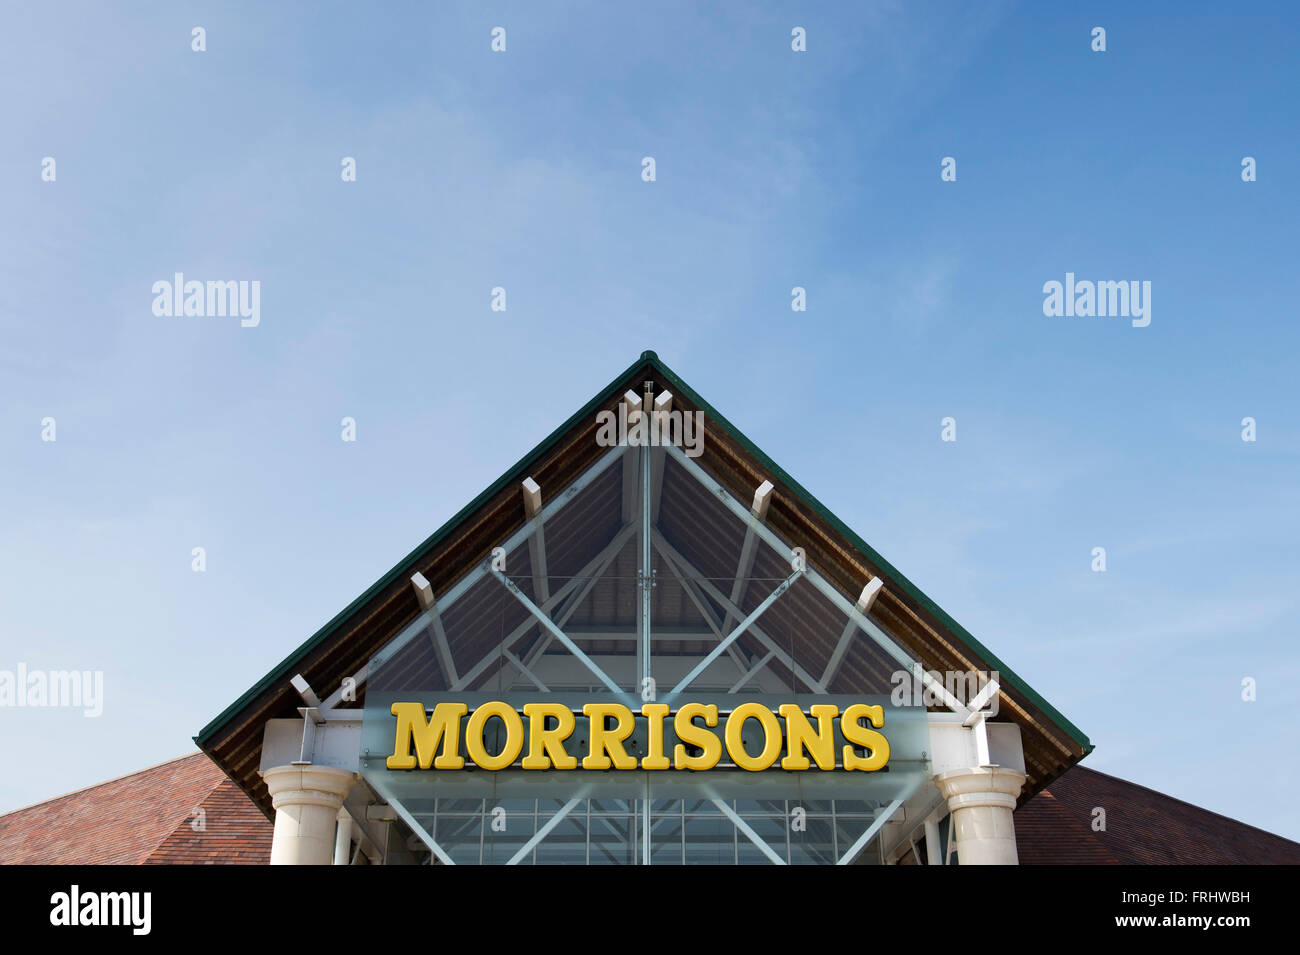 Morrisons supermarket sign against a blue cloudy sky Stock Photo